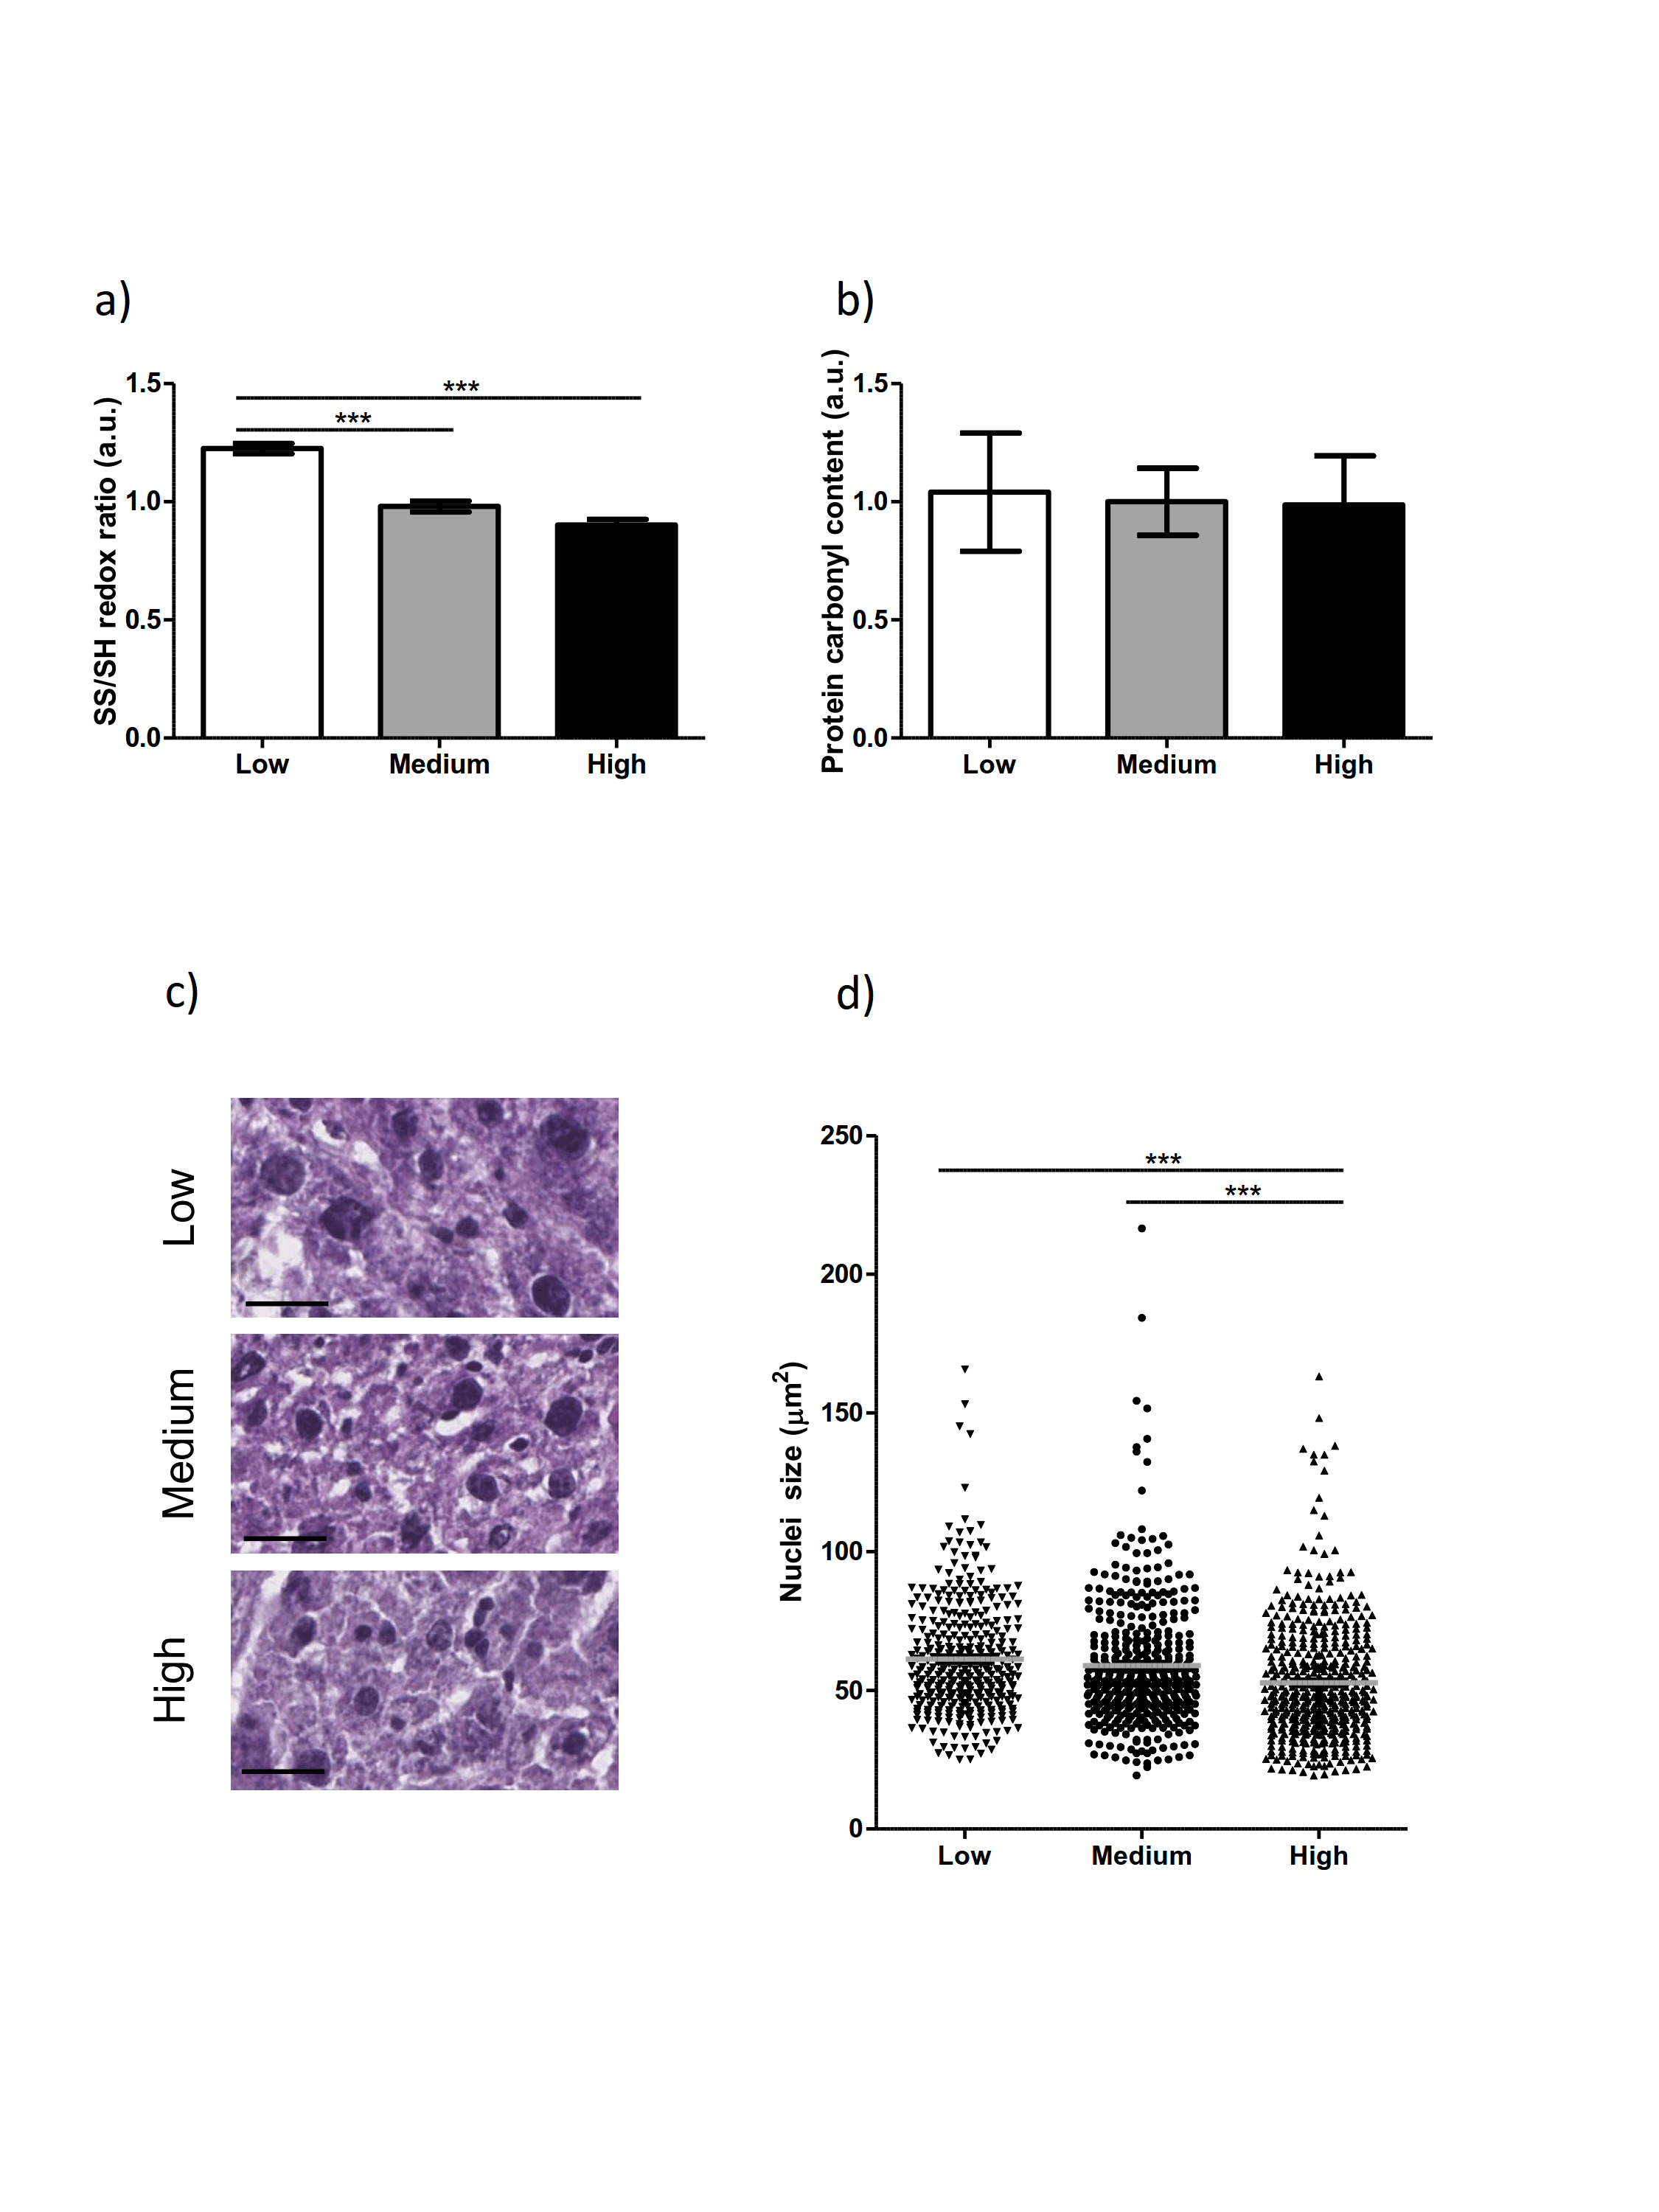 Figure 3. High vitamin E reduces polyploidization in the liver of Xpg-/- mice